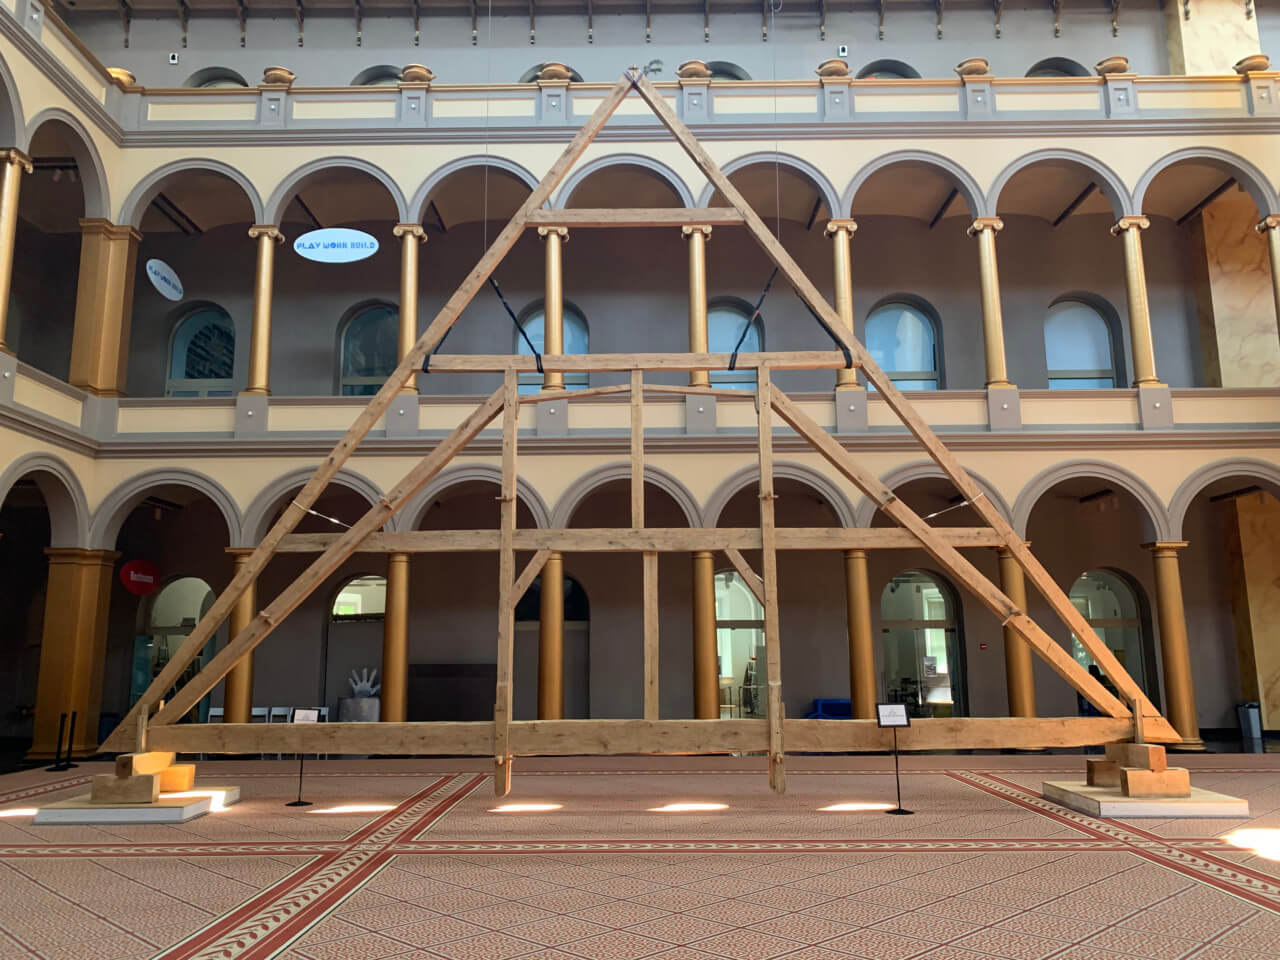 a wooden truss on display in a museum hall